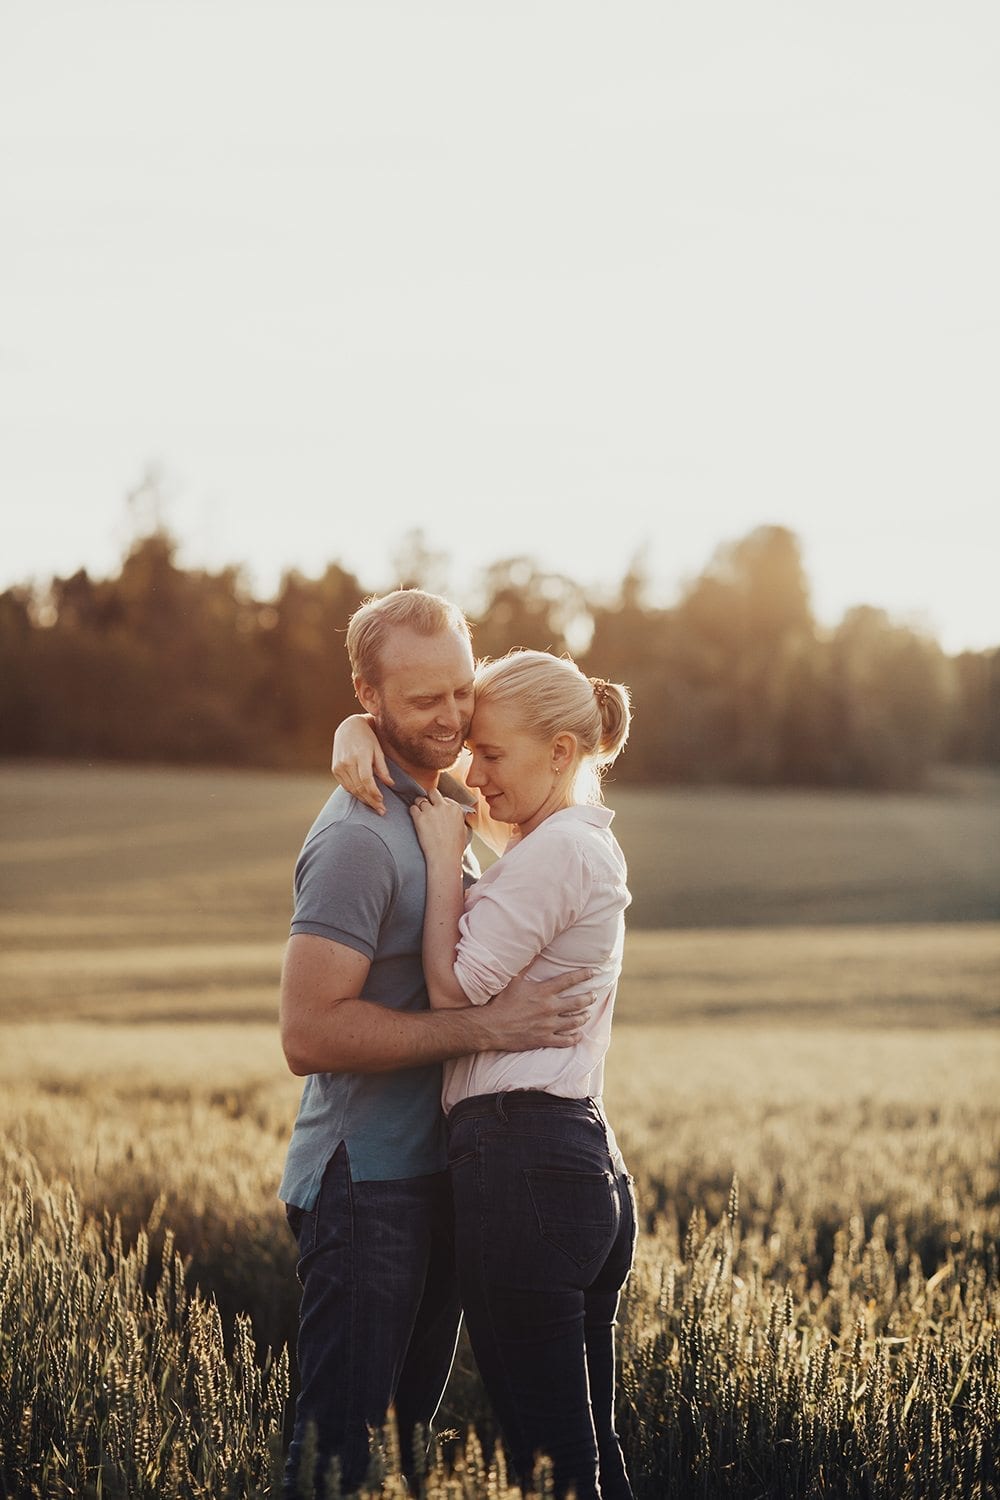 An engagement photoshoot in Norway during sunset golden hour